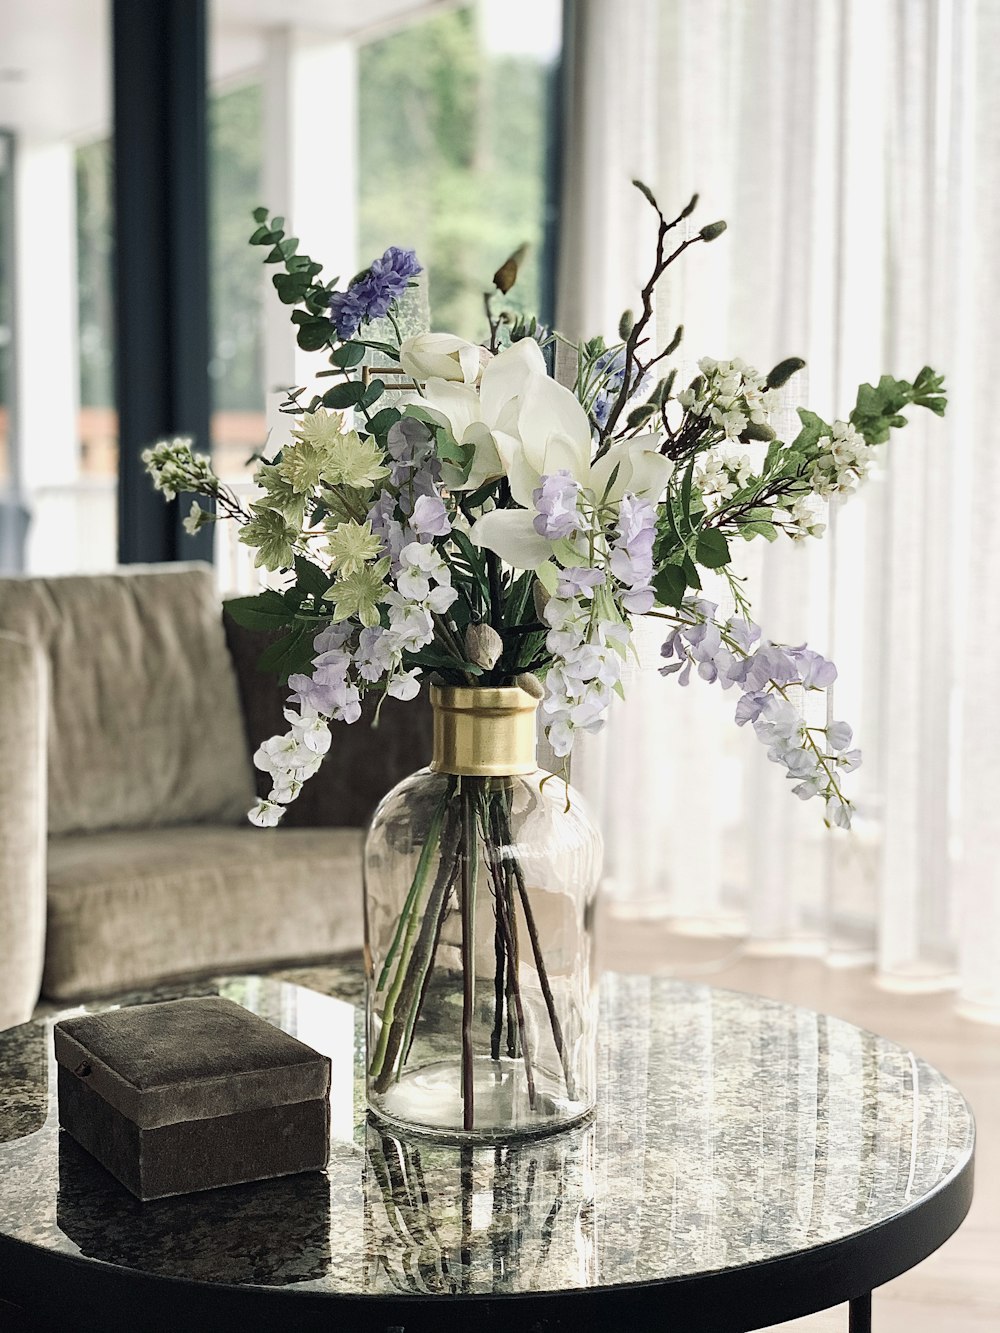 purple flowers in clear glass vase on gray couch